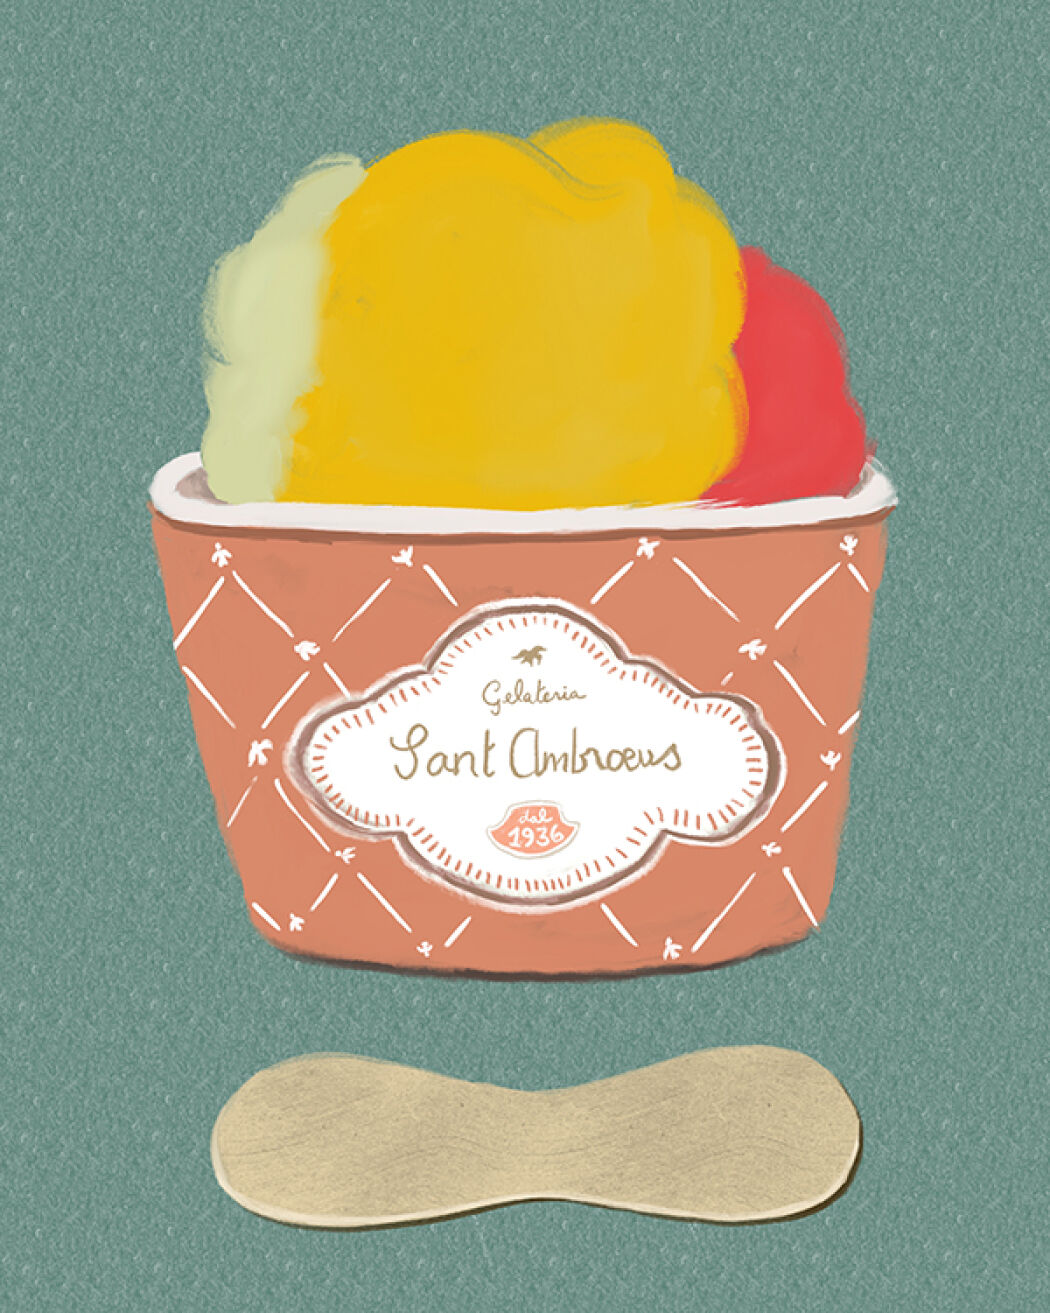 Ice cream packaging illustrated by Christina Gliha